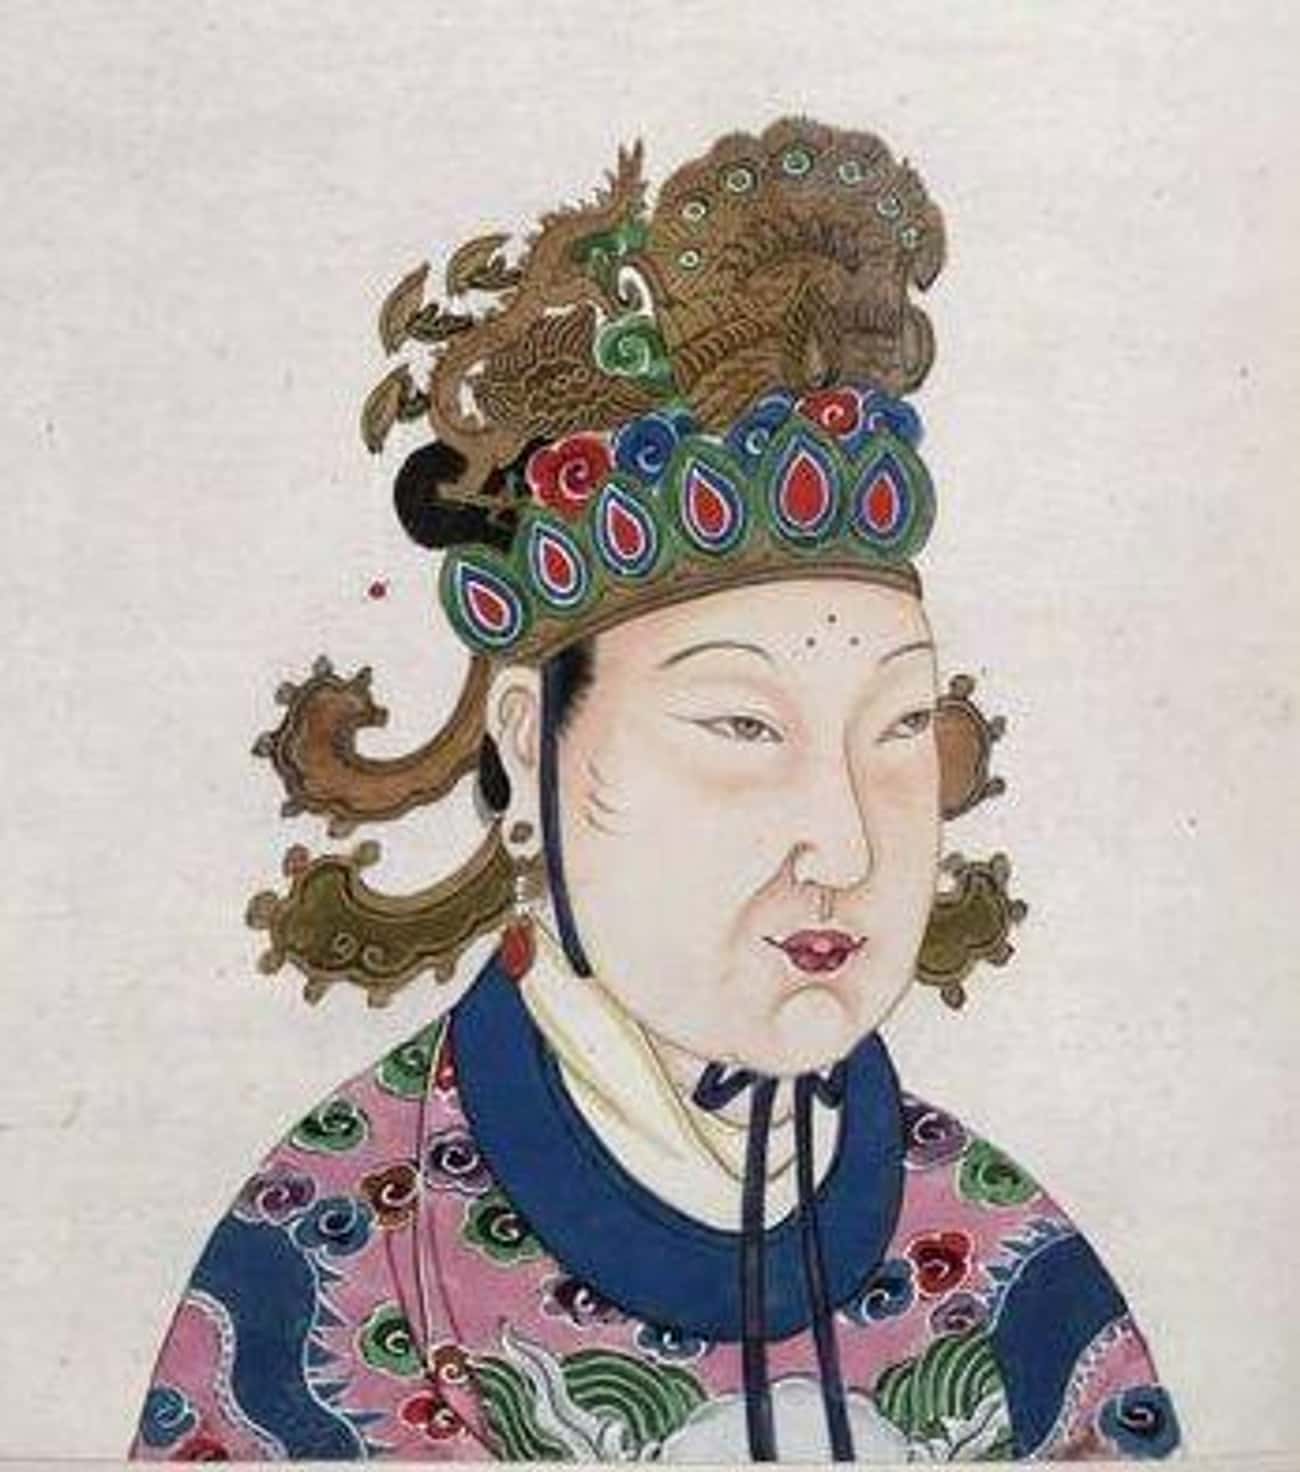 Empress Wu Zetian Of China Was Willing To Eliminate Anyone To Stay In Power, Even Her Own Family